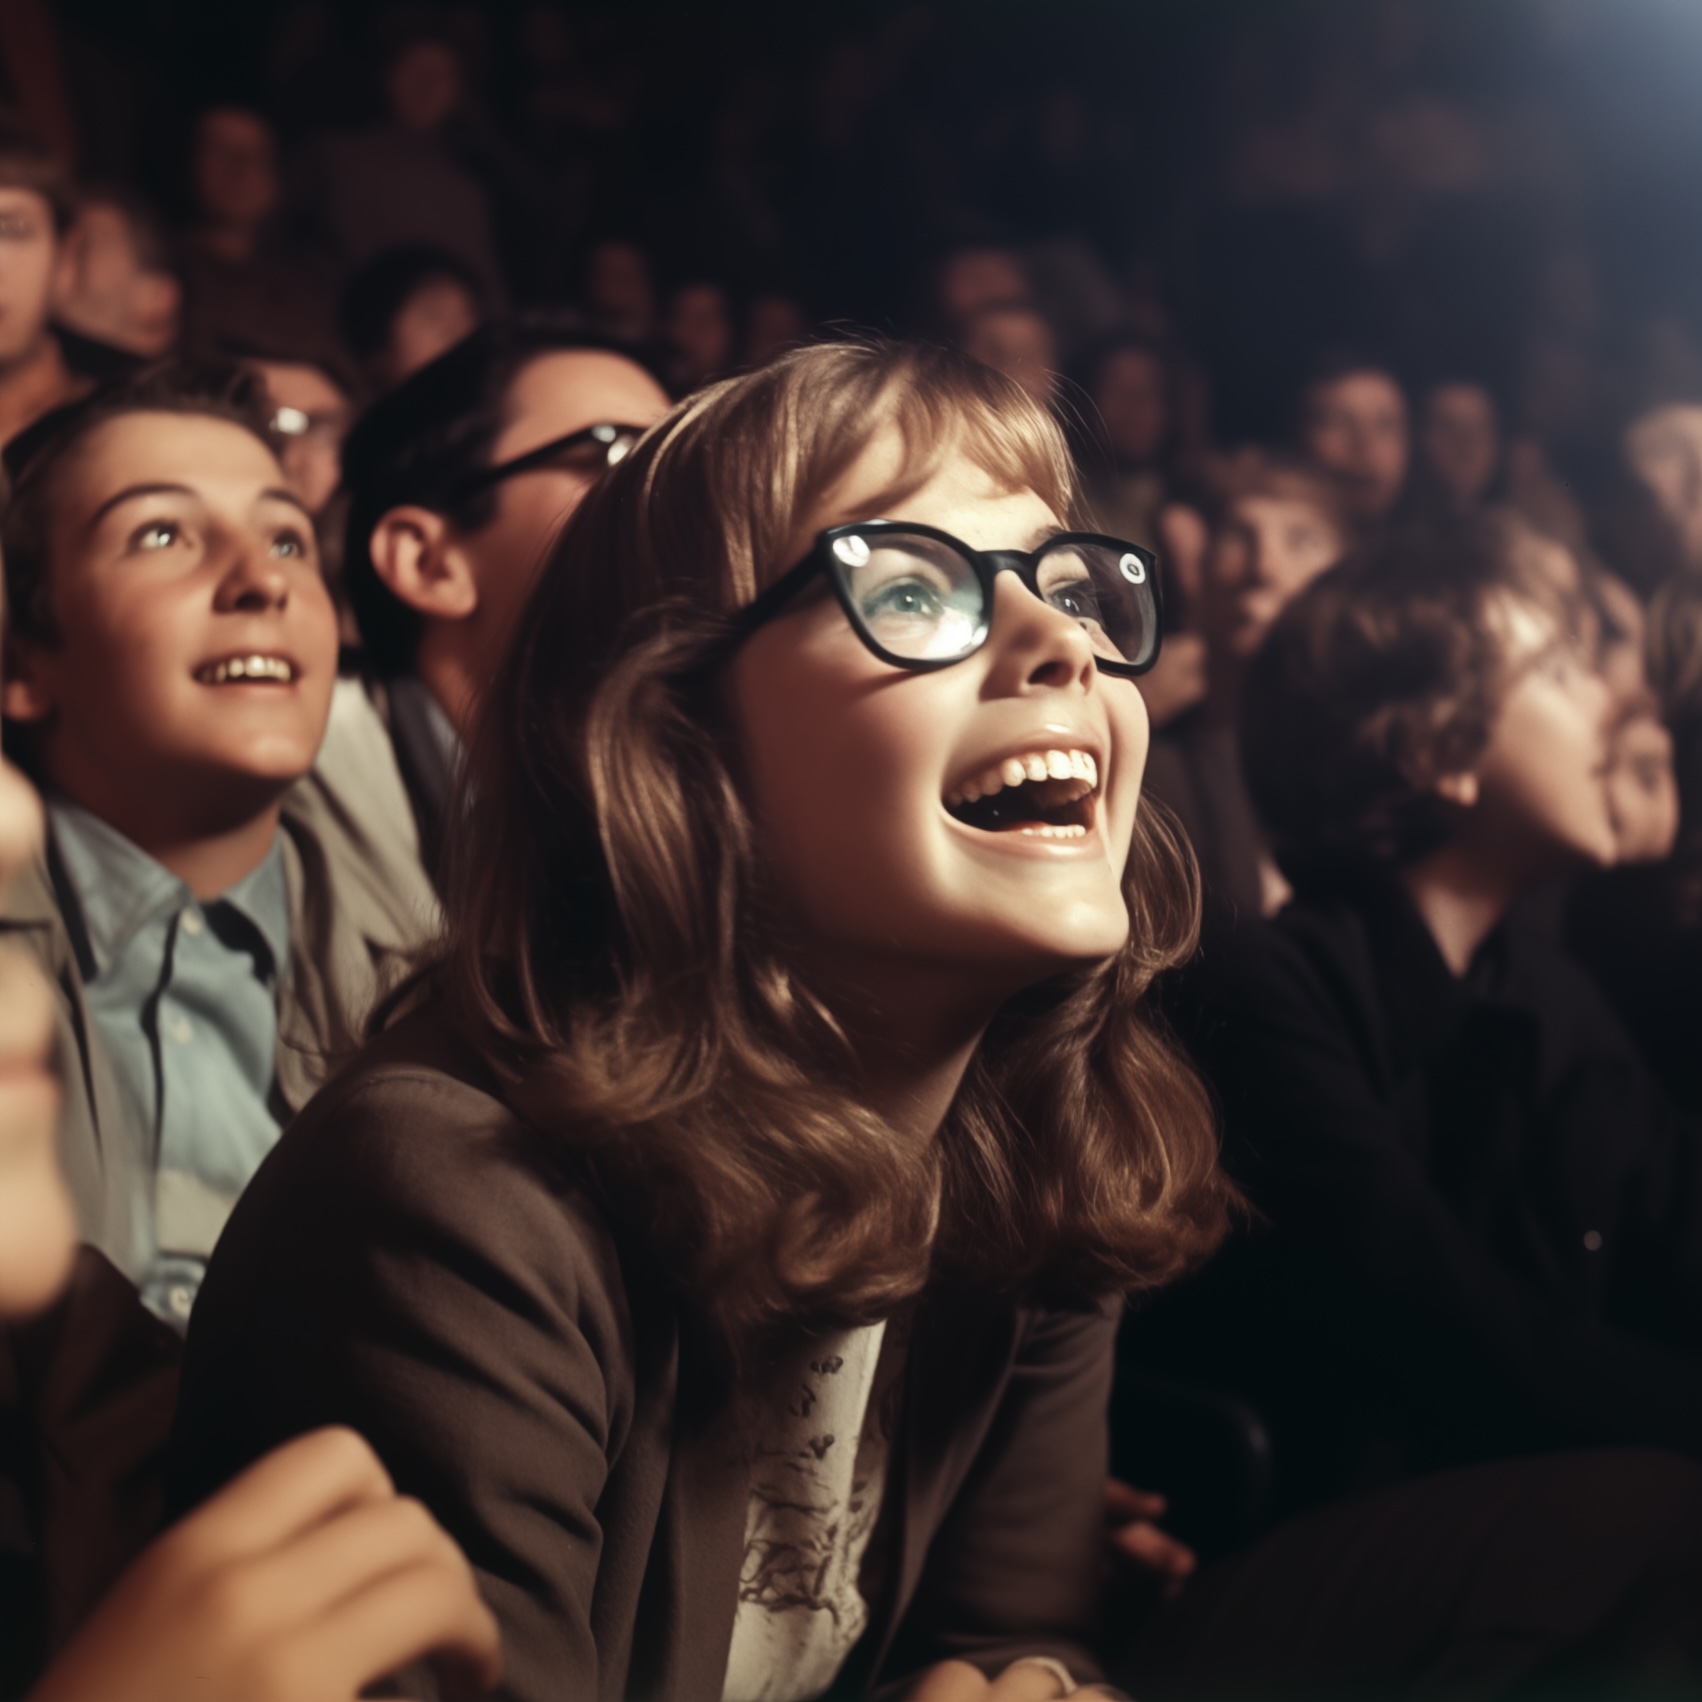 A vintage photo of a young girl with glasses looking up in awe, surrounded by an audience.